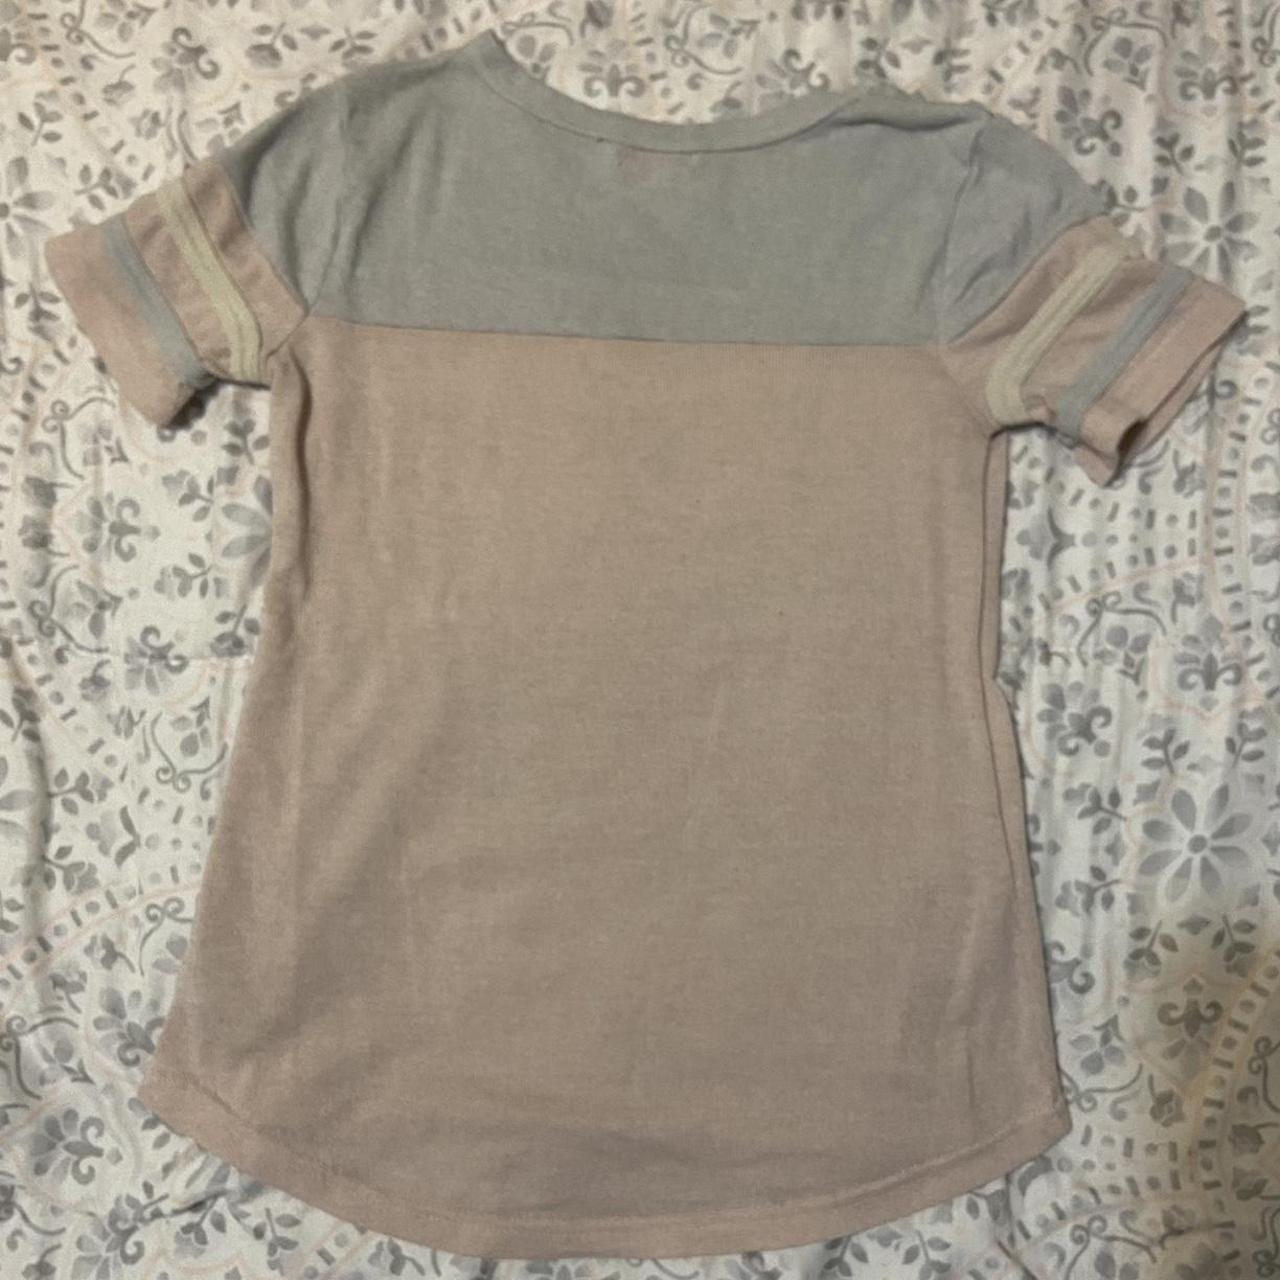 Poof Pink and Grey Shirt (2)